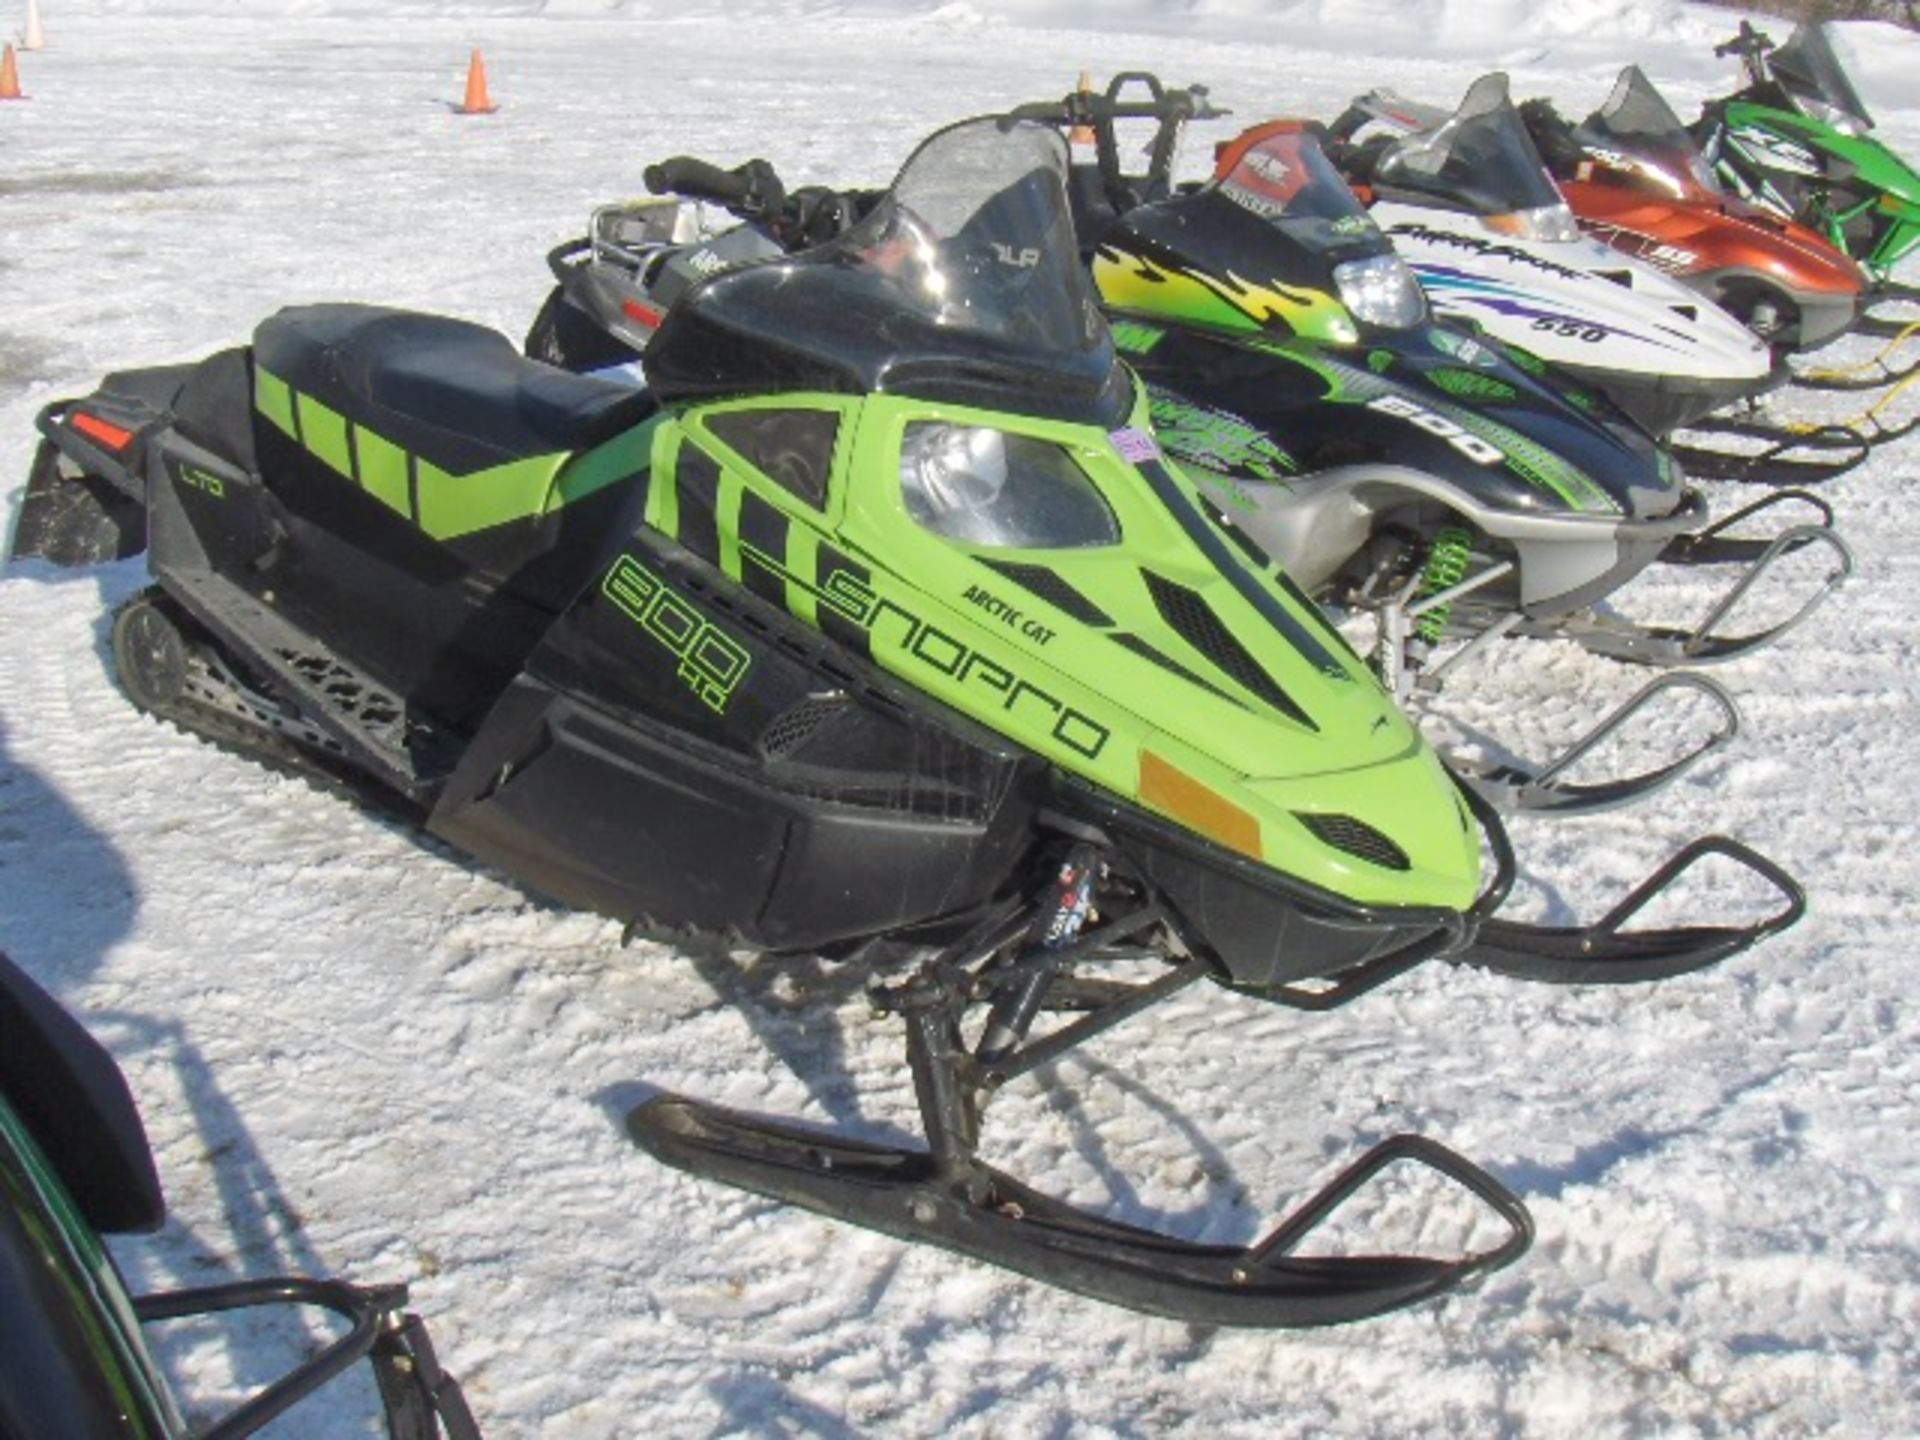 2011 ARCTIC CAT  800 SNO PRO F8 LTD  4UF11SNW6BT111818 snowmobile, electric start, studs, sold - Image 2 of 2